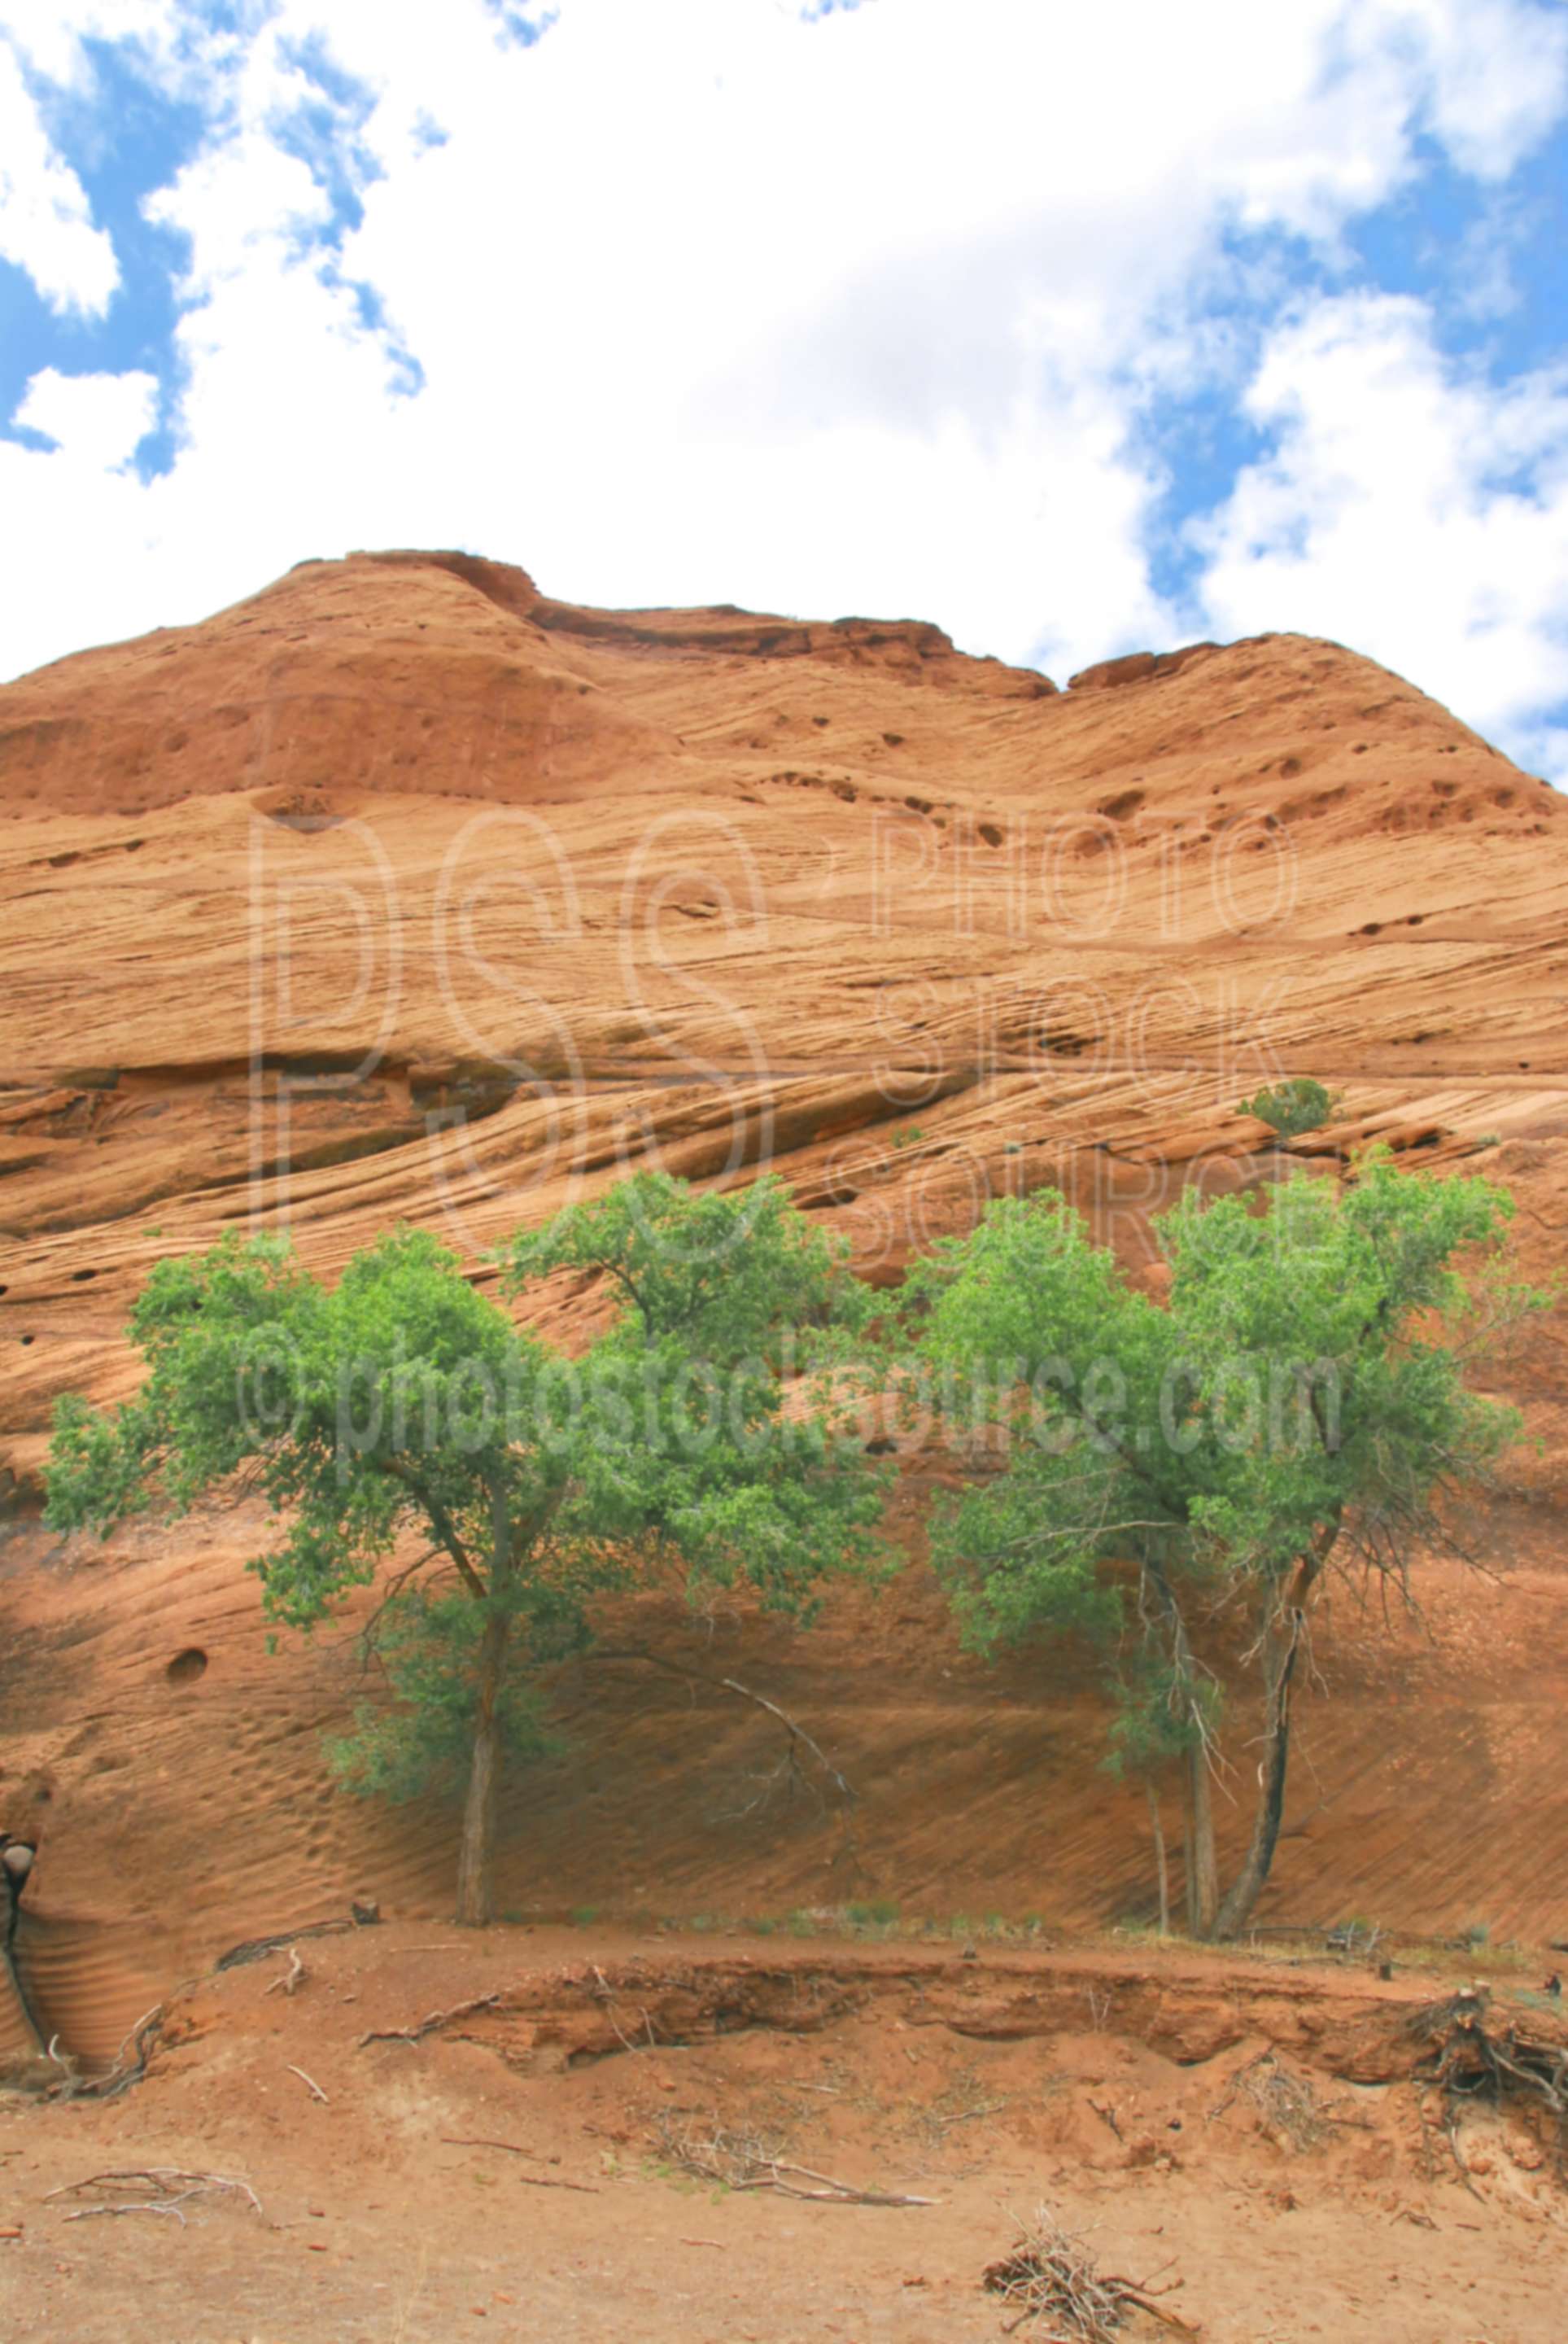 Eroded Sandstone and Trees,canyon,navajo,erosion,sandstone,tree,native american